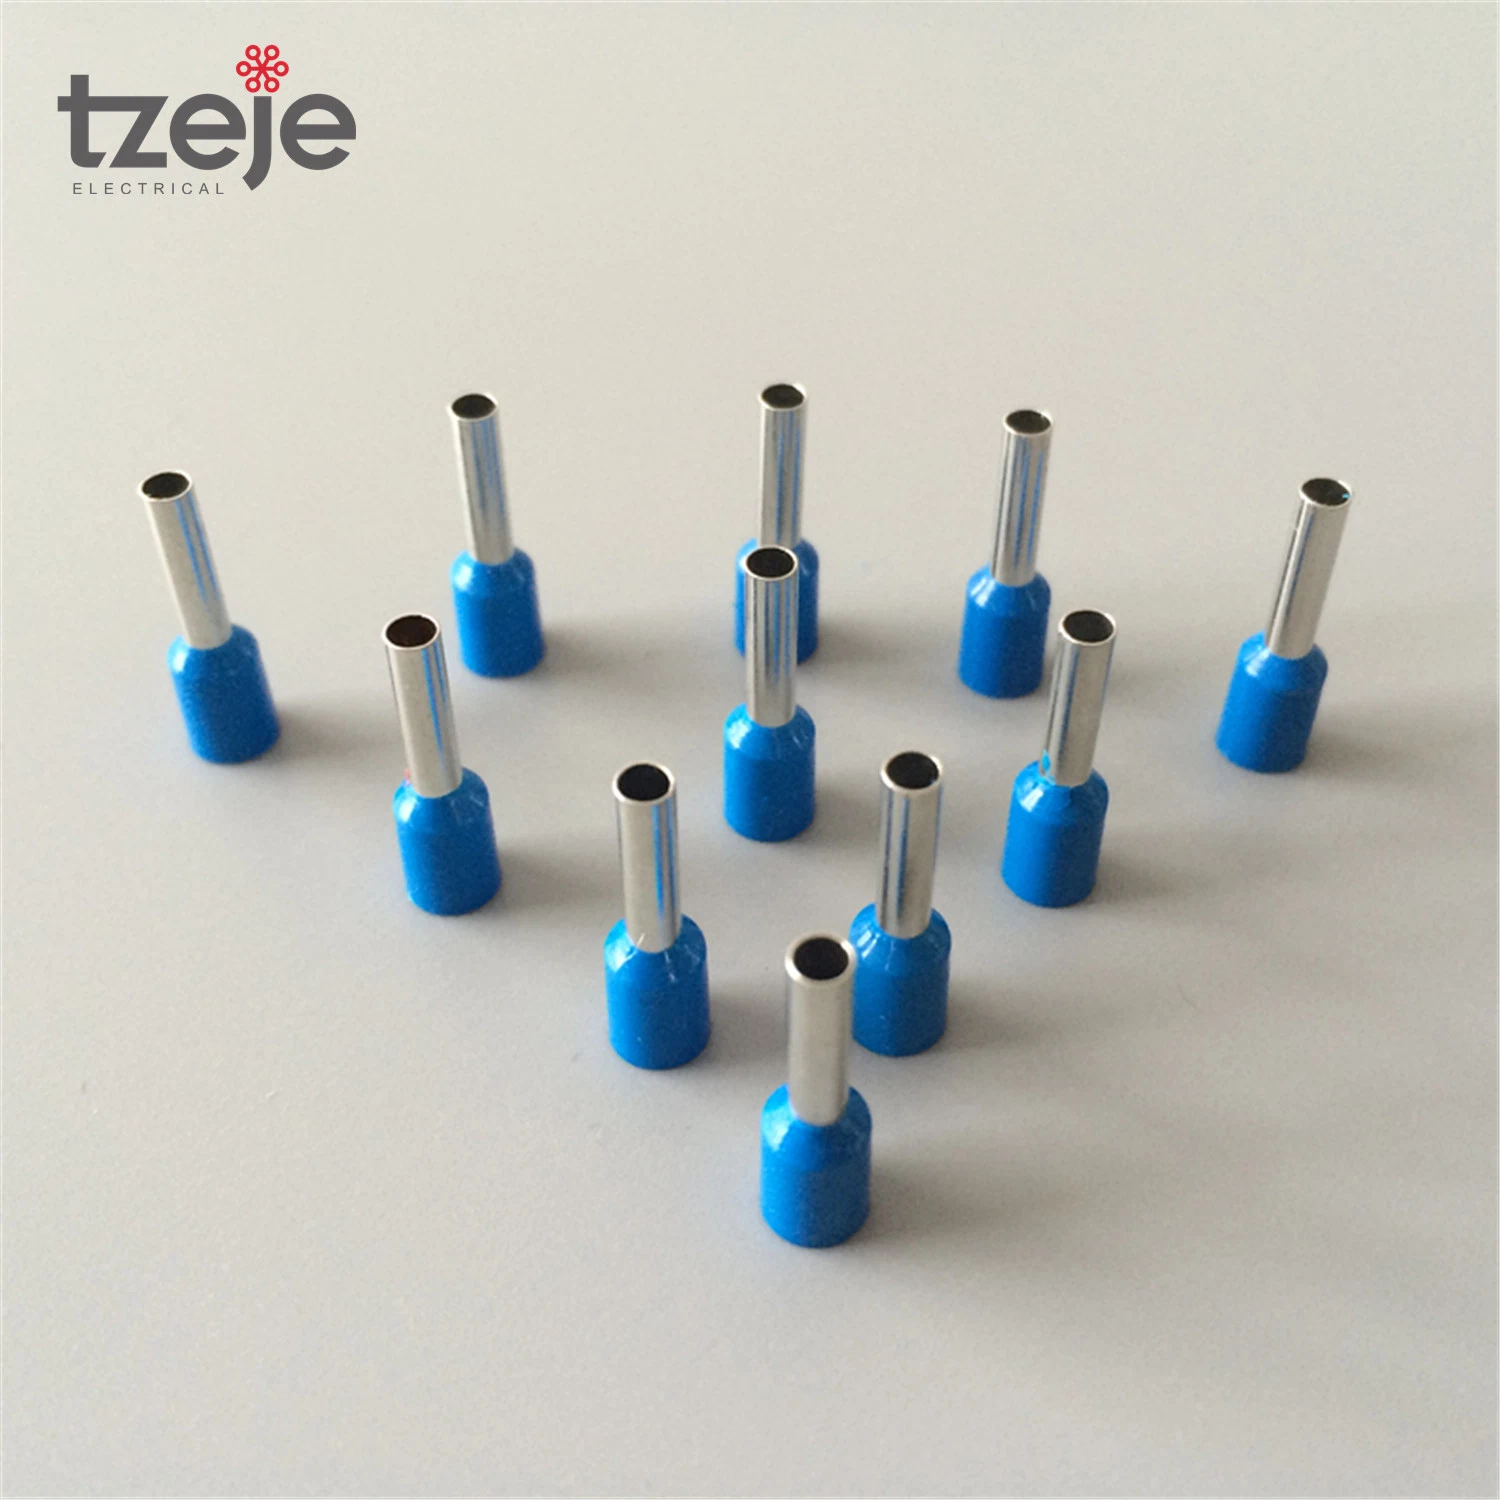 E0308 Single Wire Insulated Terminal for Wire Connector